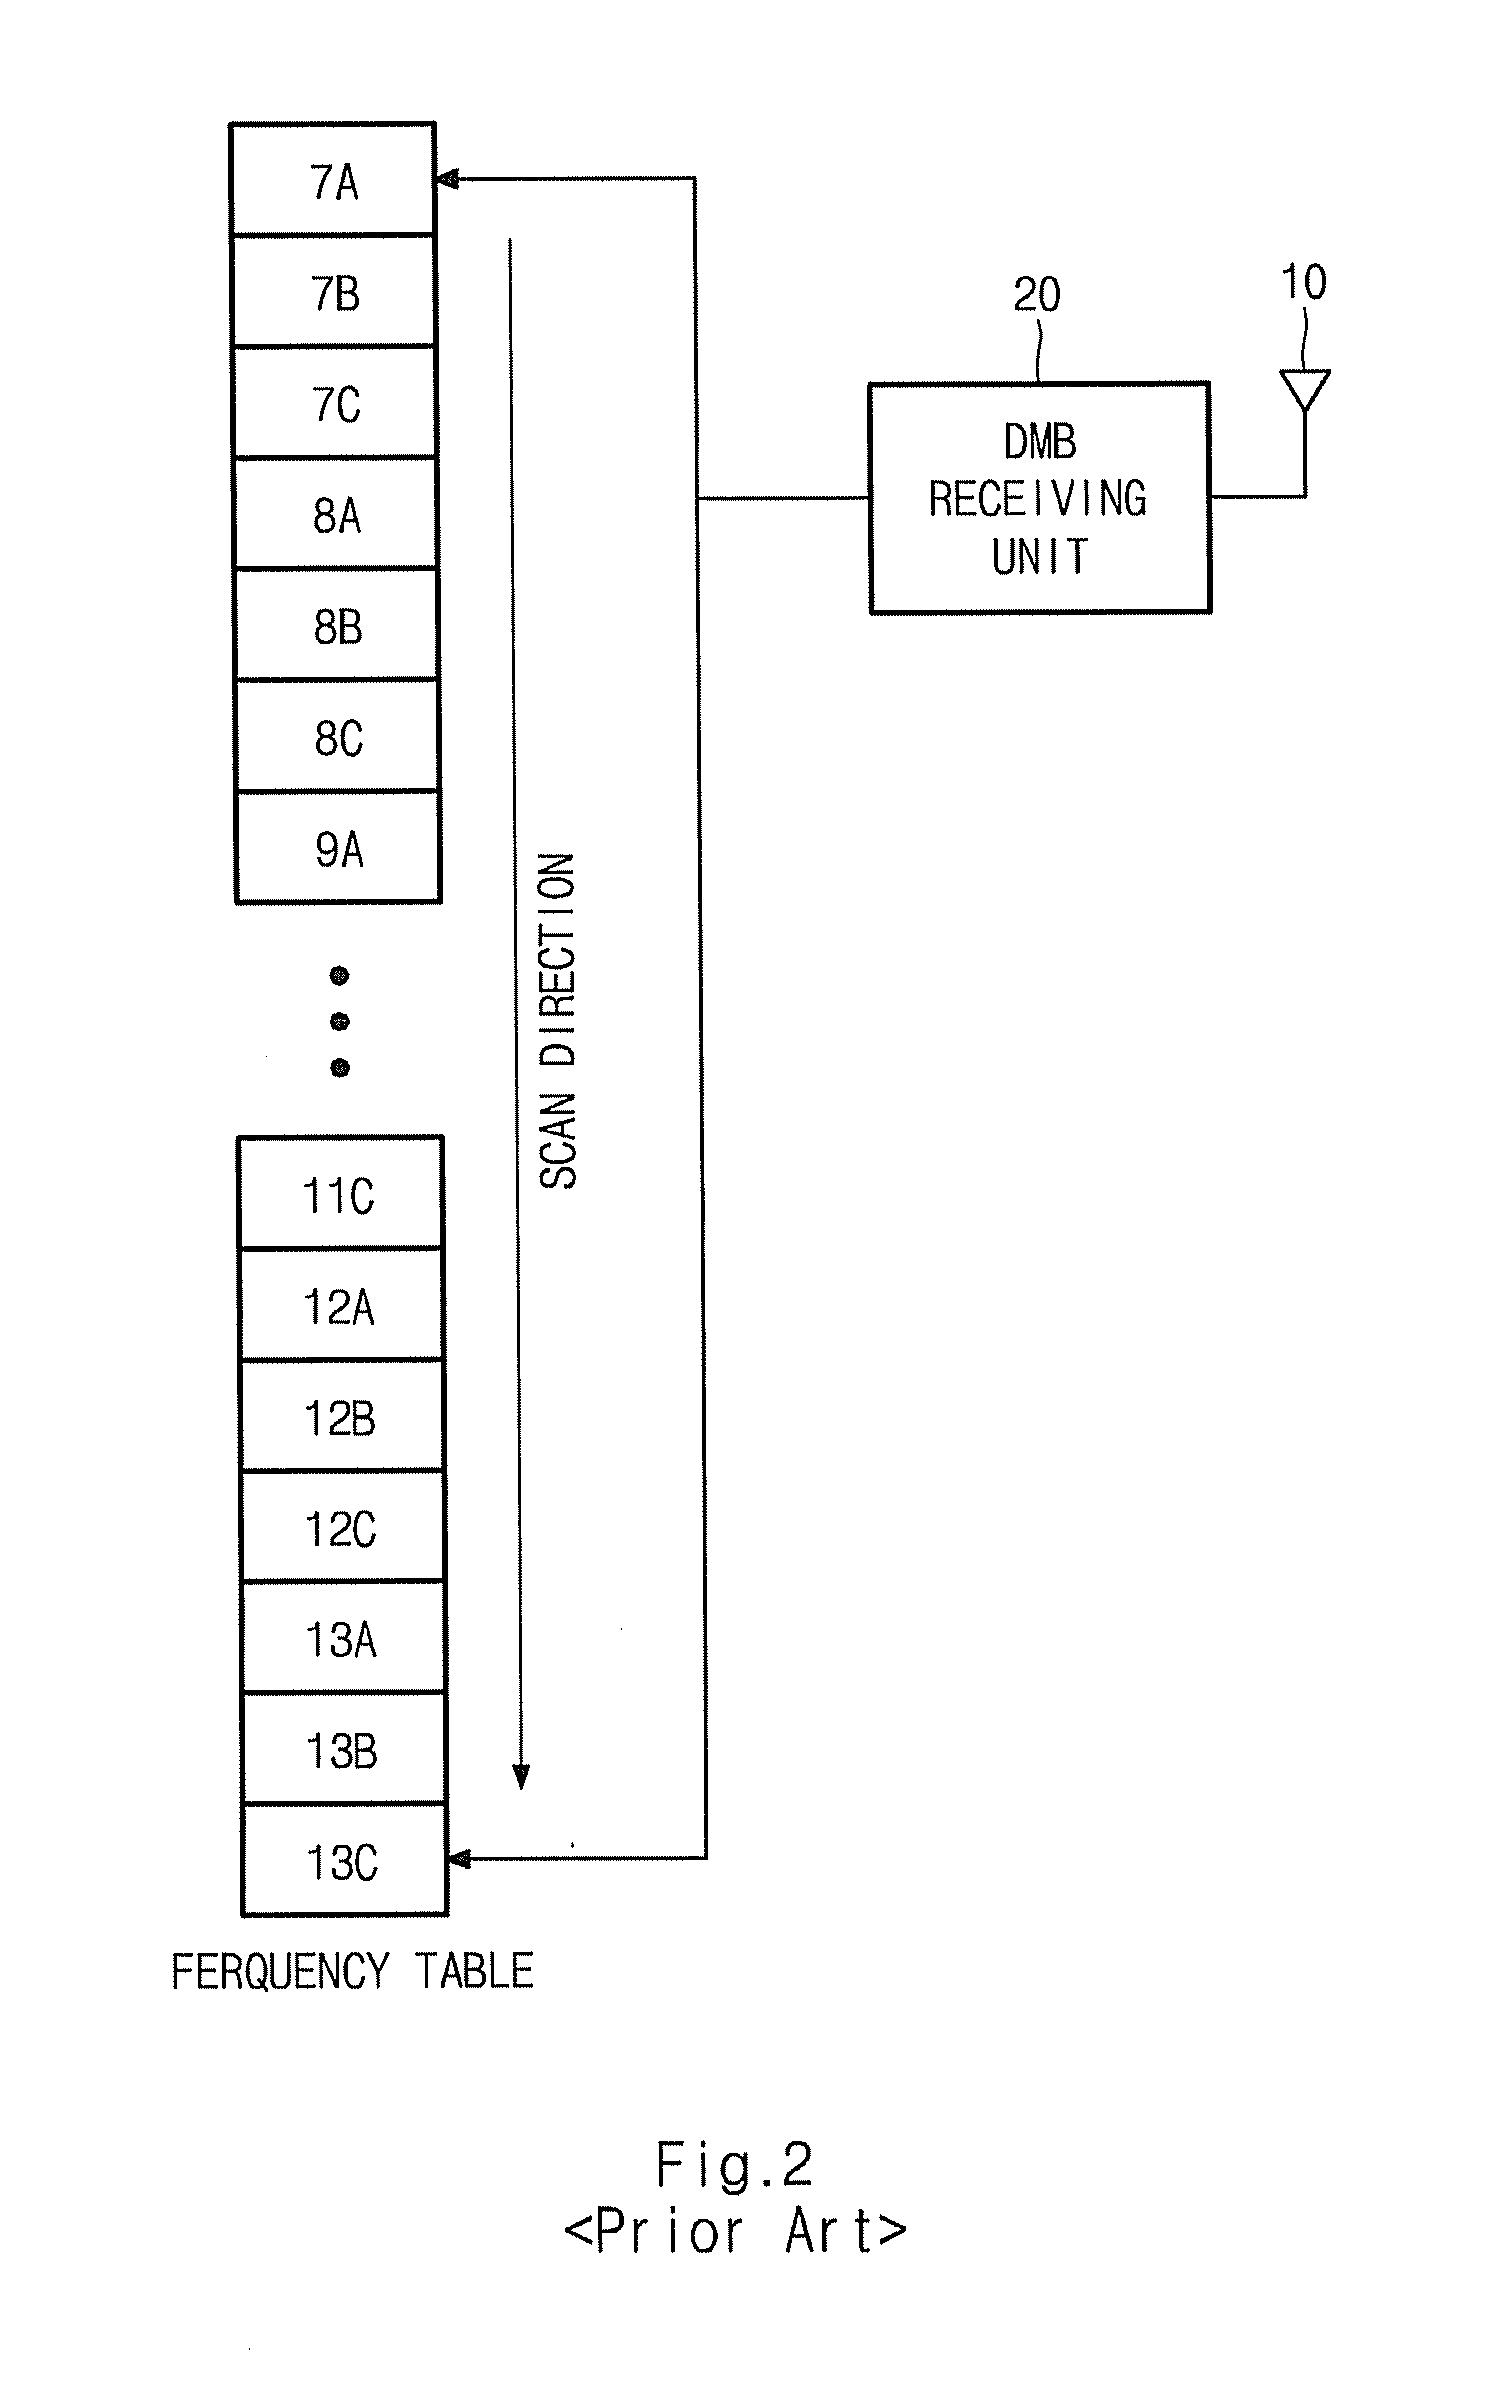 Digital multimedia broadcasting system for reducing scan time, and method for the same